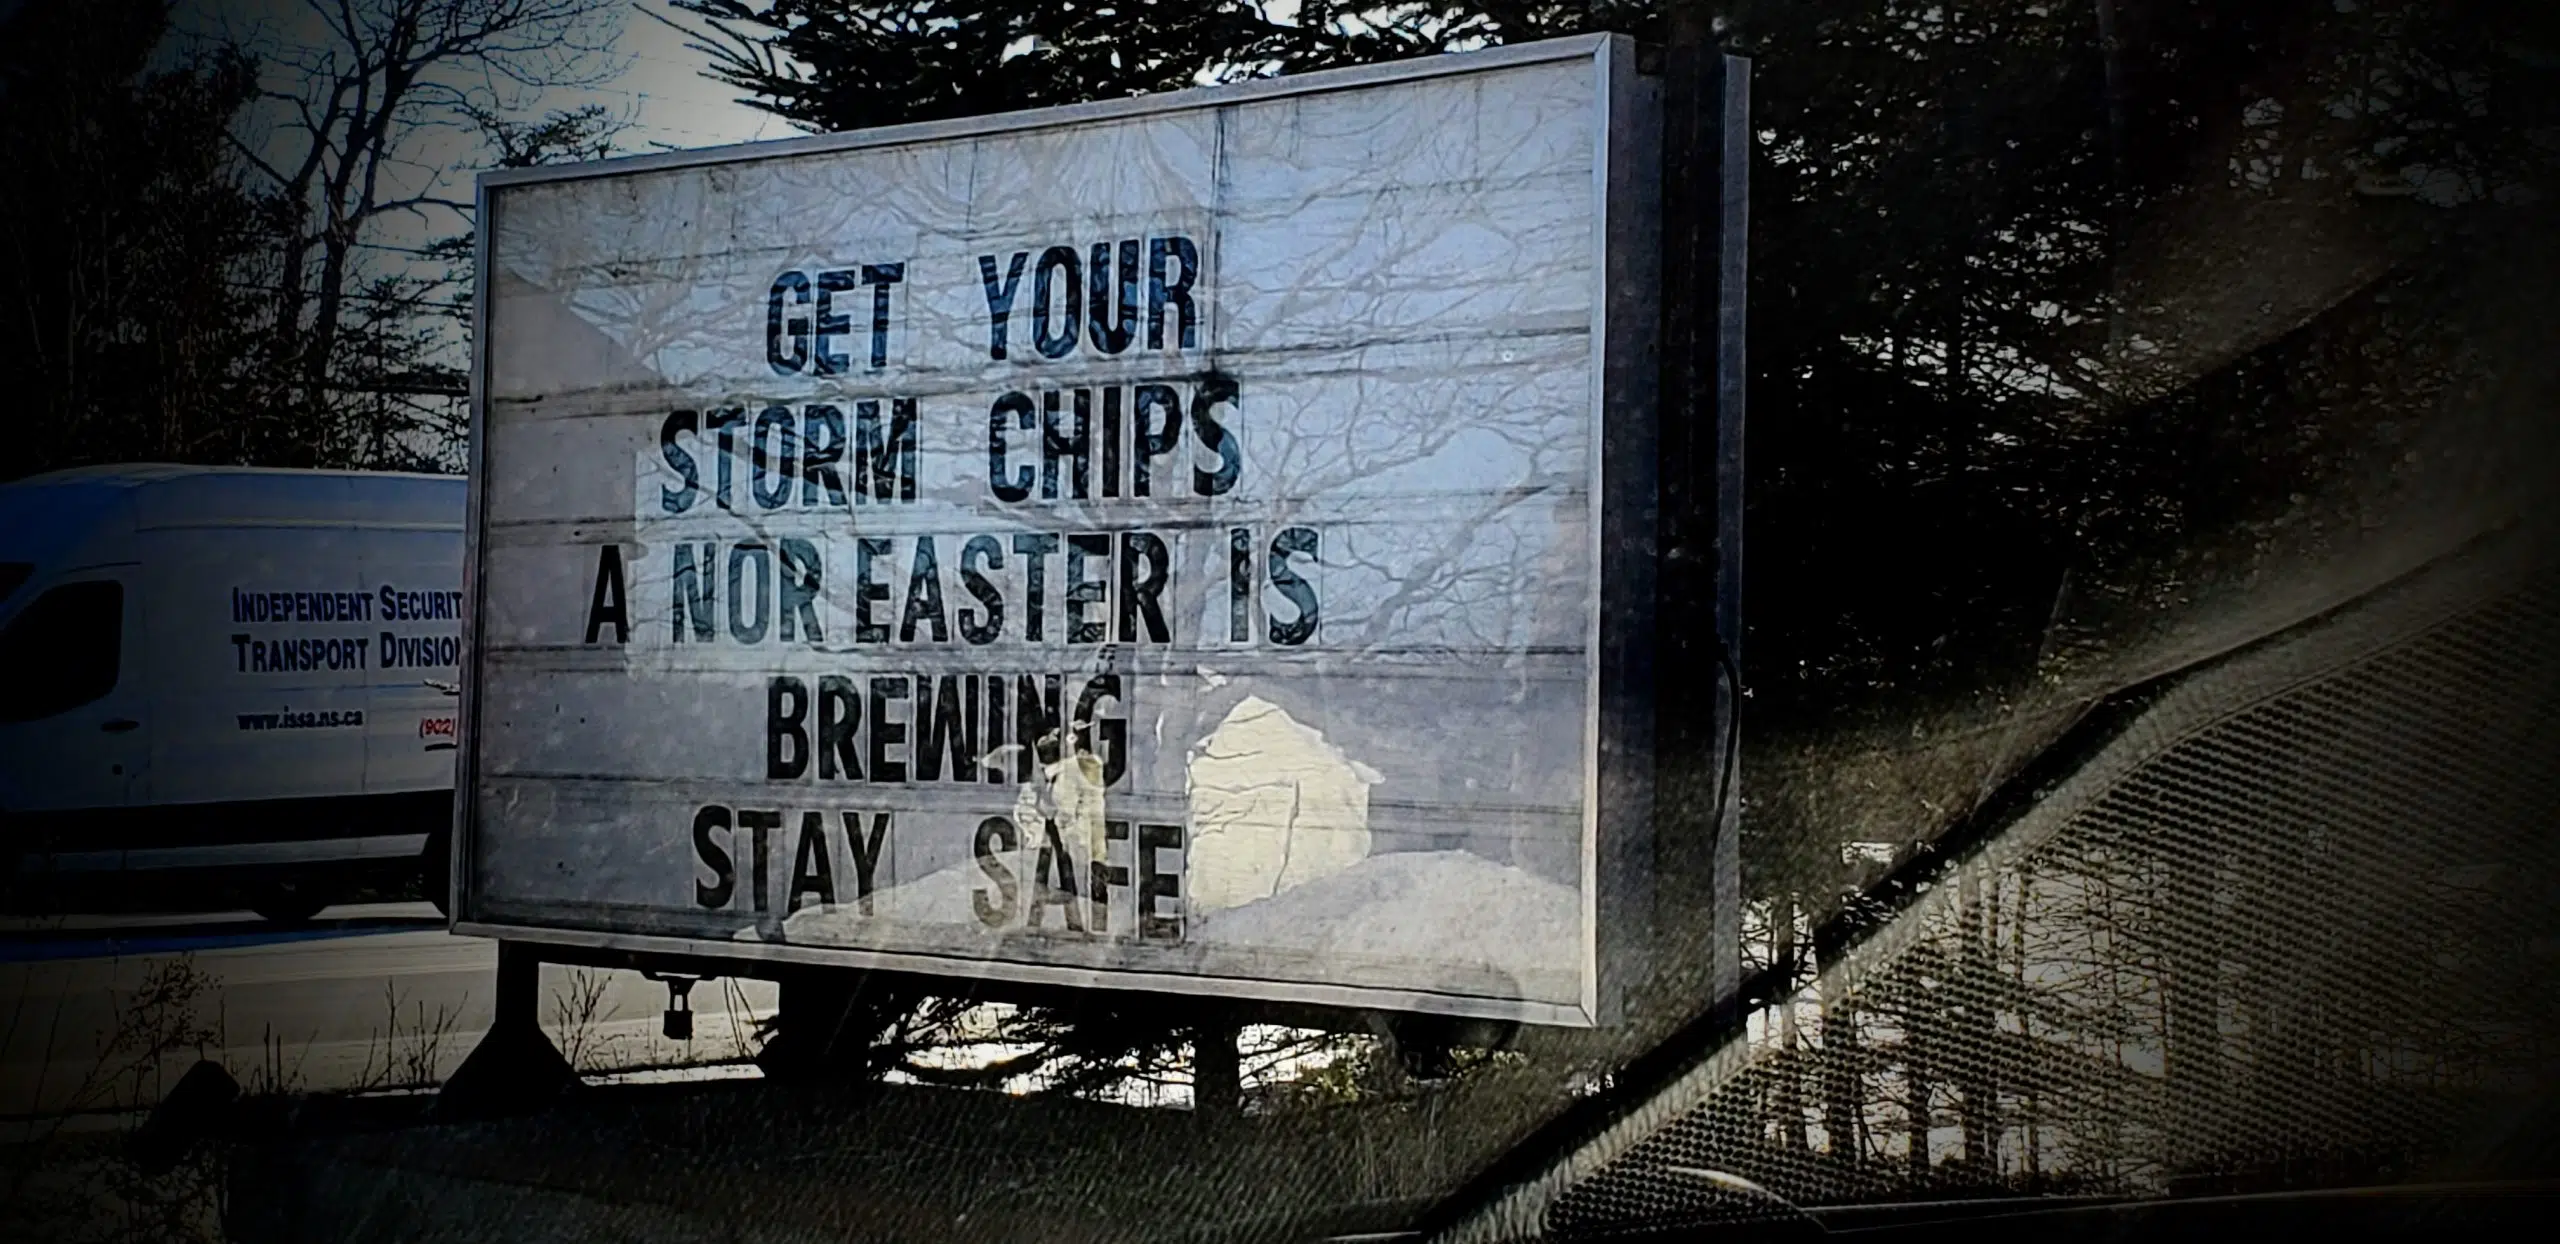 GOT YOUR STORM CHIPS?